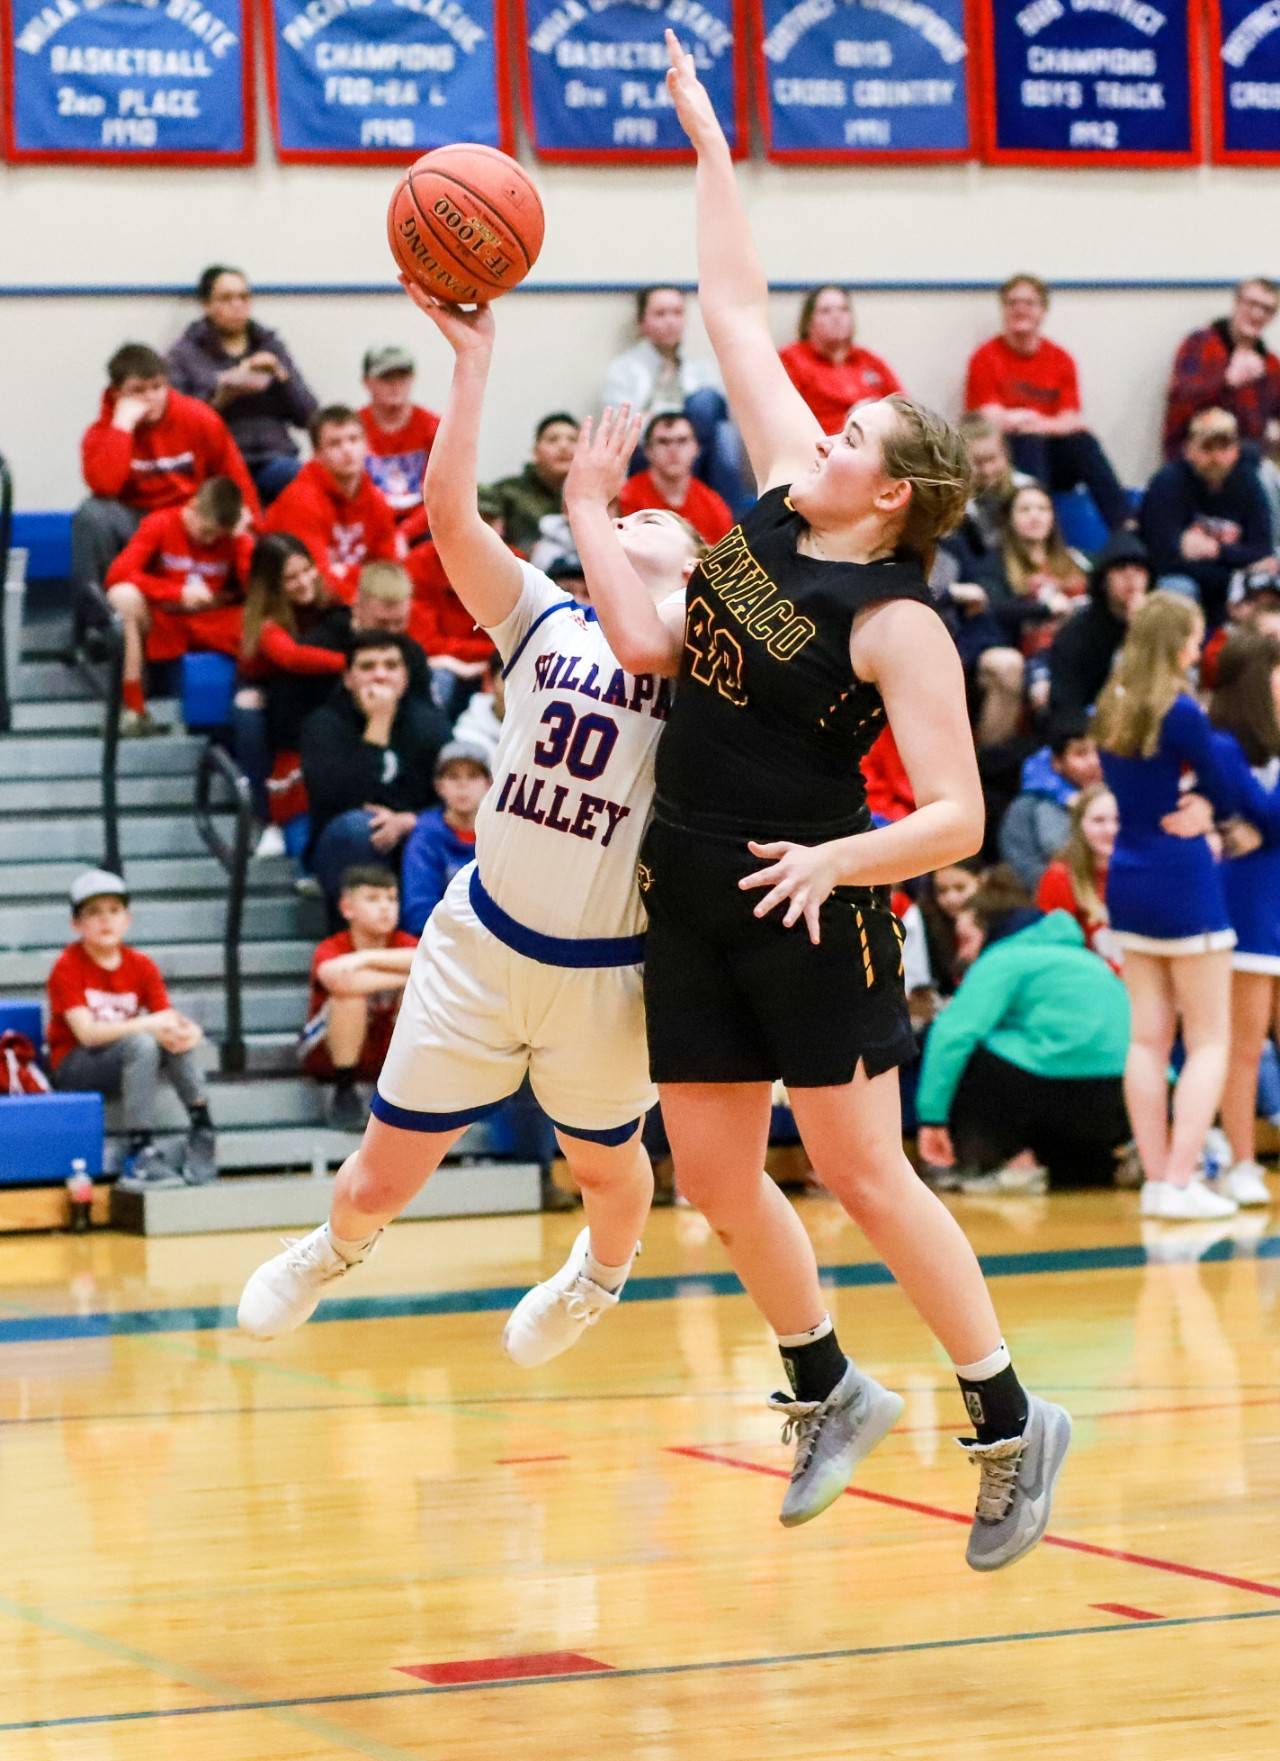 Willapa Valley’s Cami Swartz (30) puts up a shot against Ilwaco’s Kylie Gray during the Vikings’ 53-31 loss on Monday in Menlo. (Photo by Larry Bale)